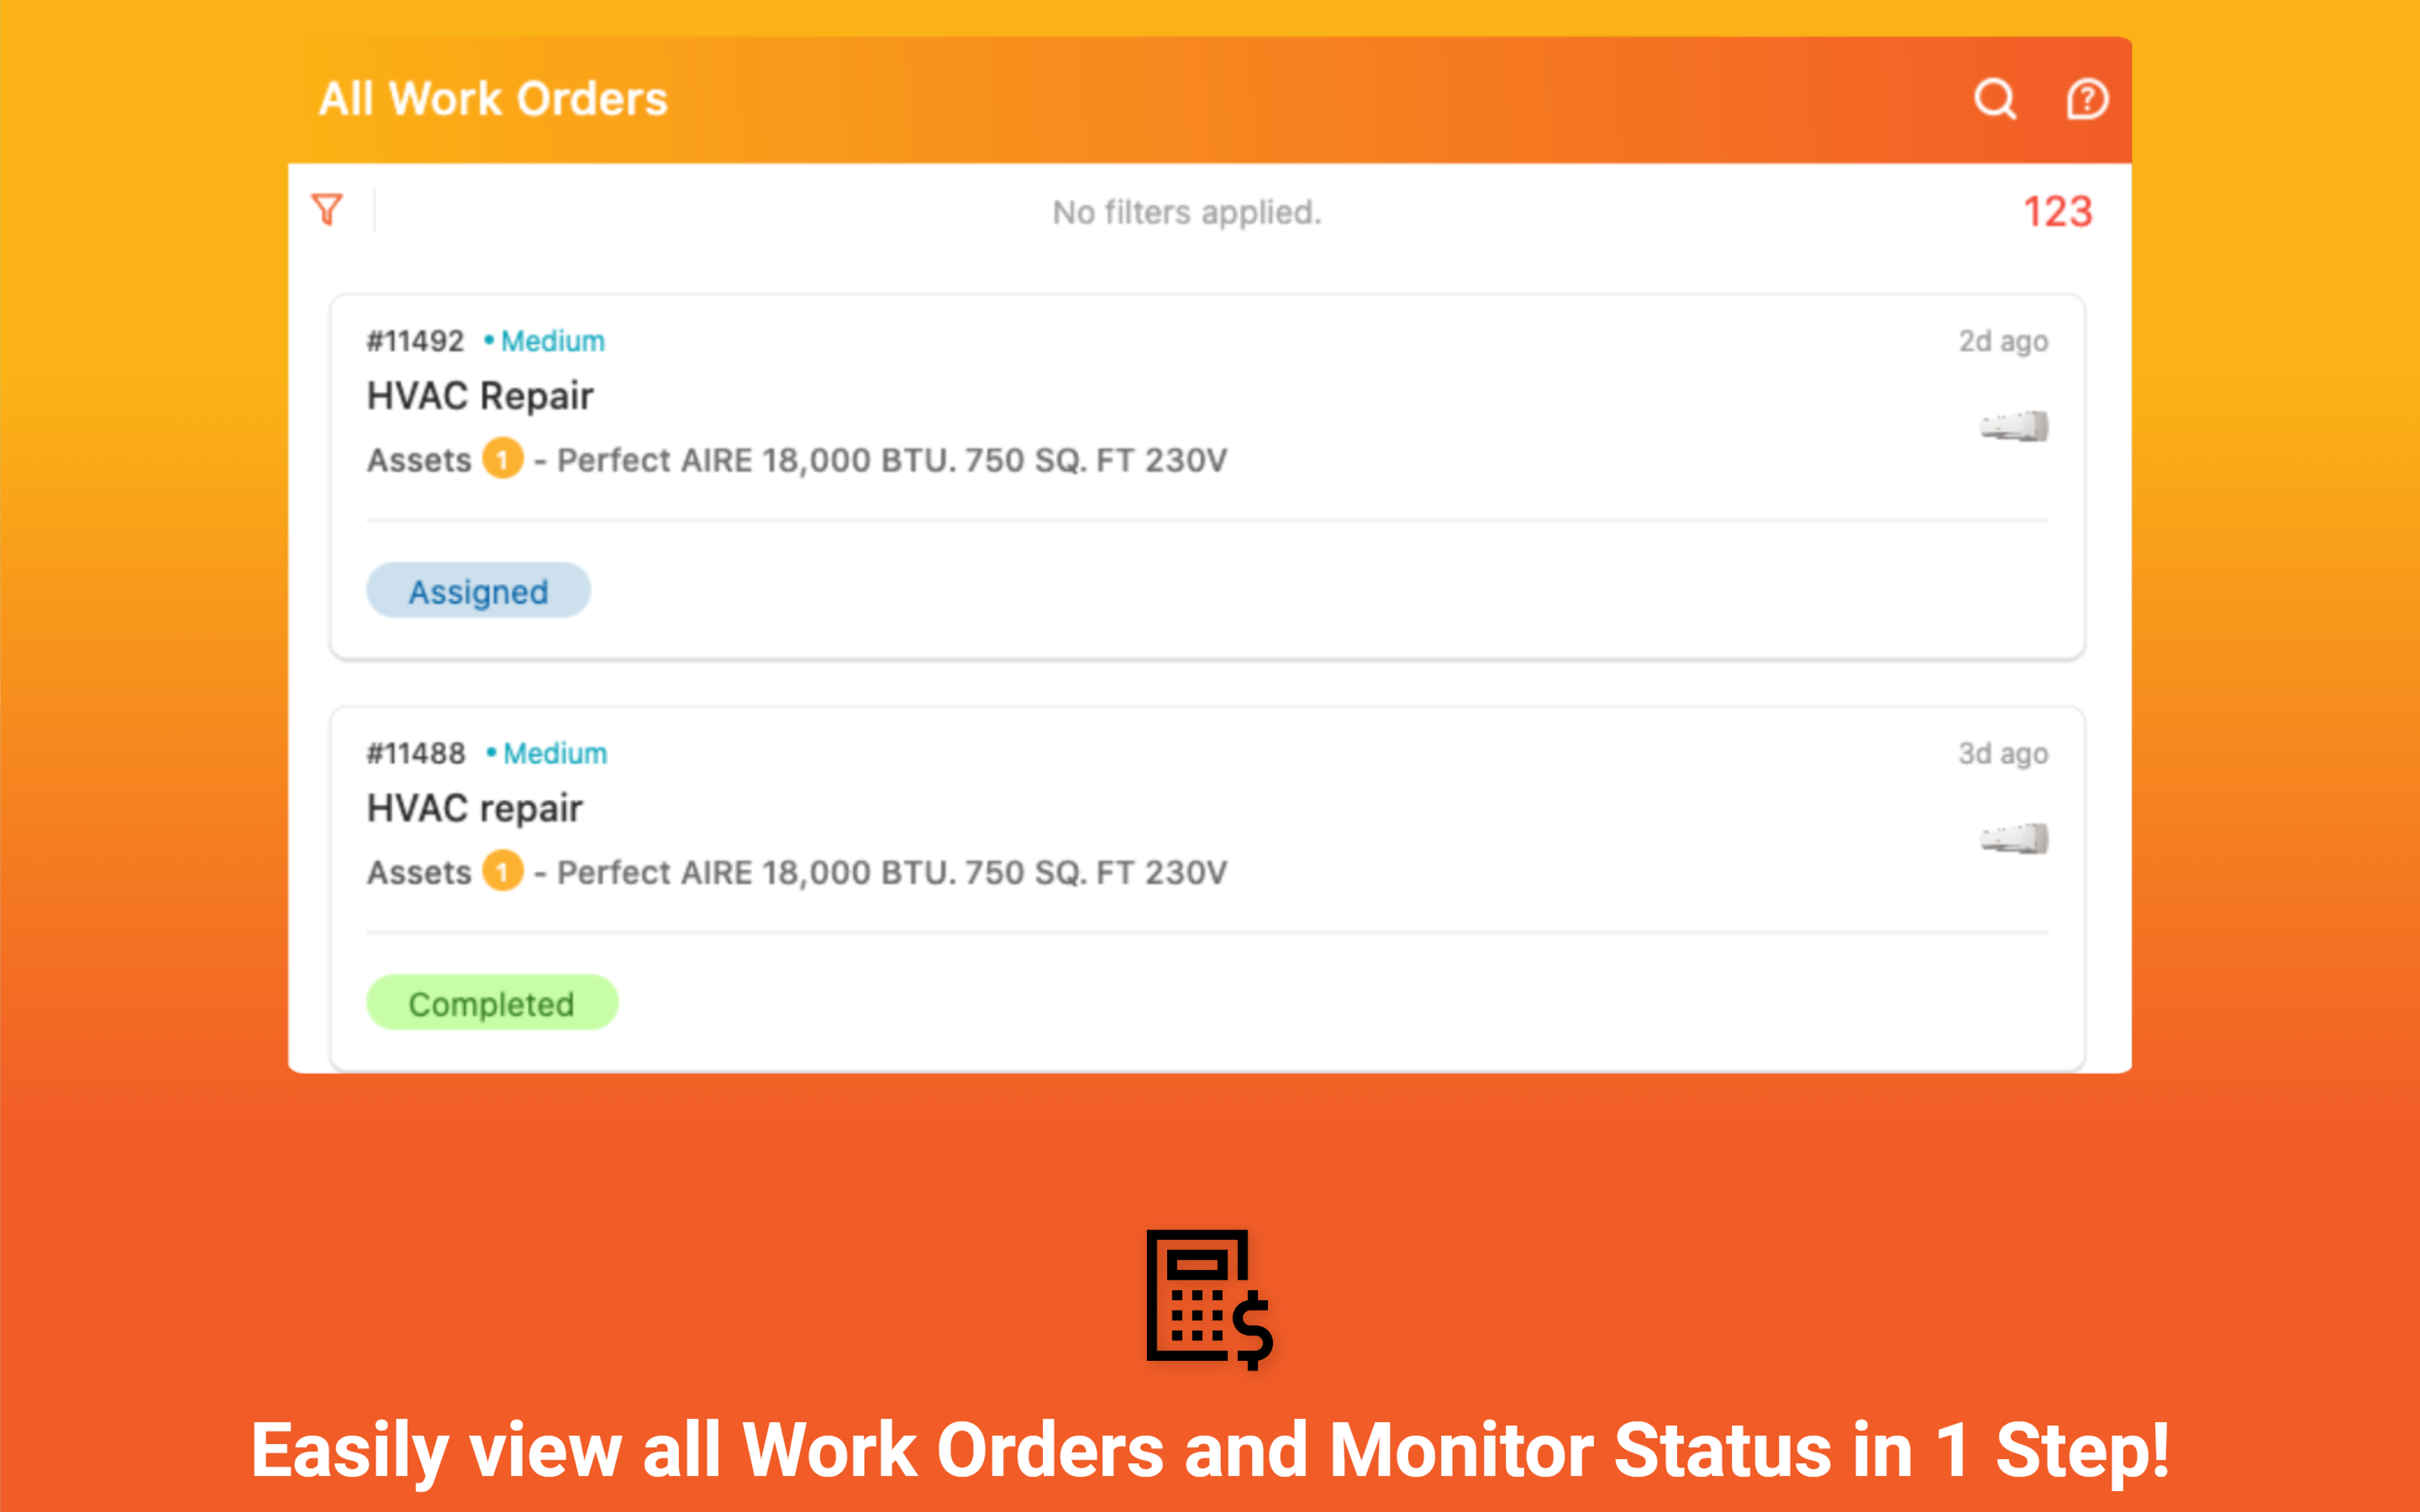 Easily view all the Work Orders and monitor the status in 1 step!